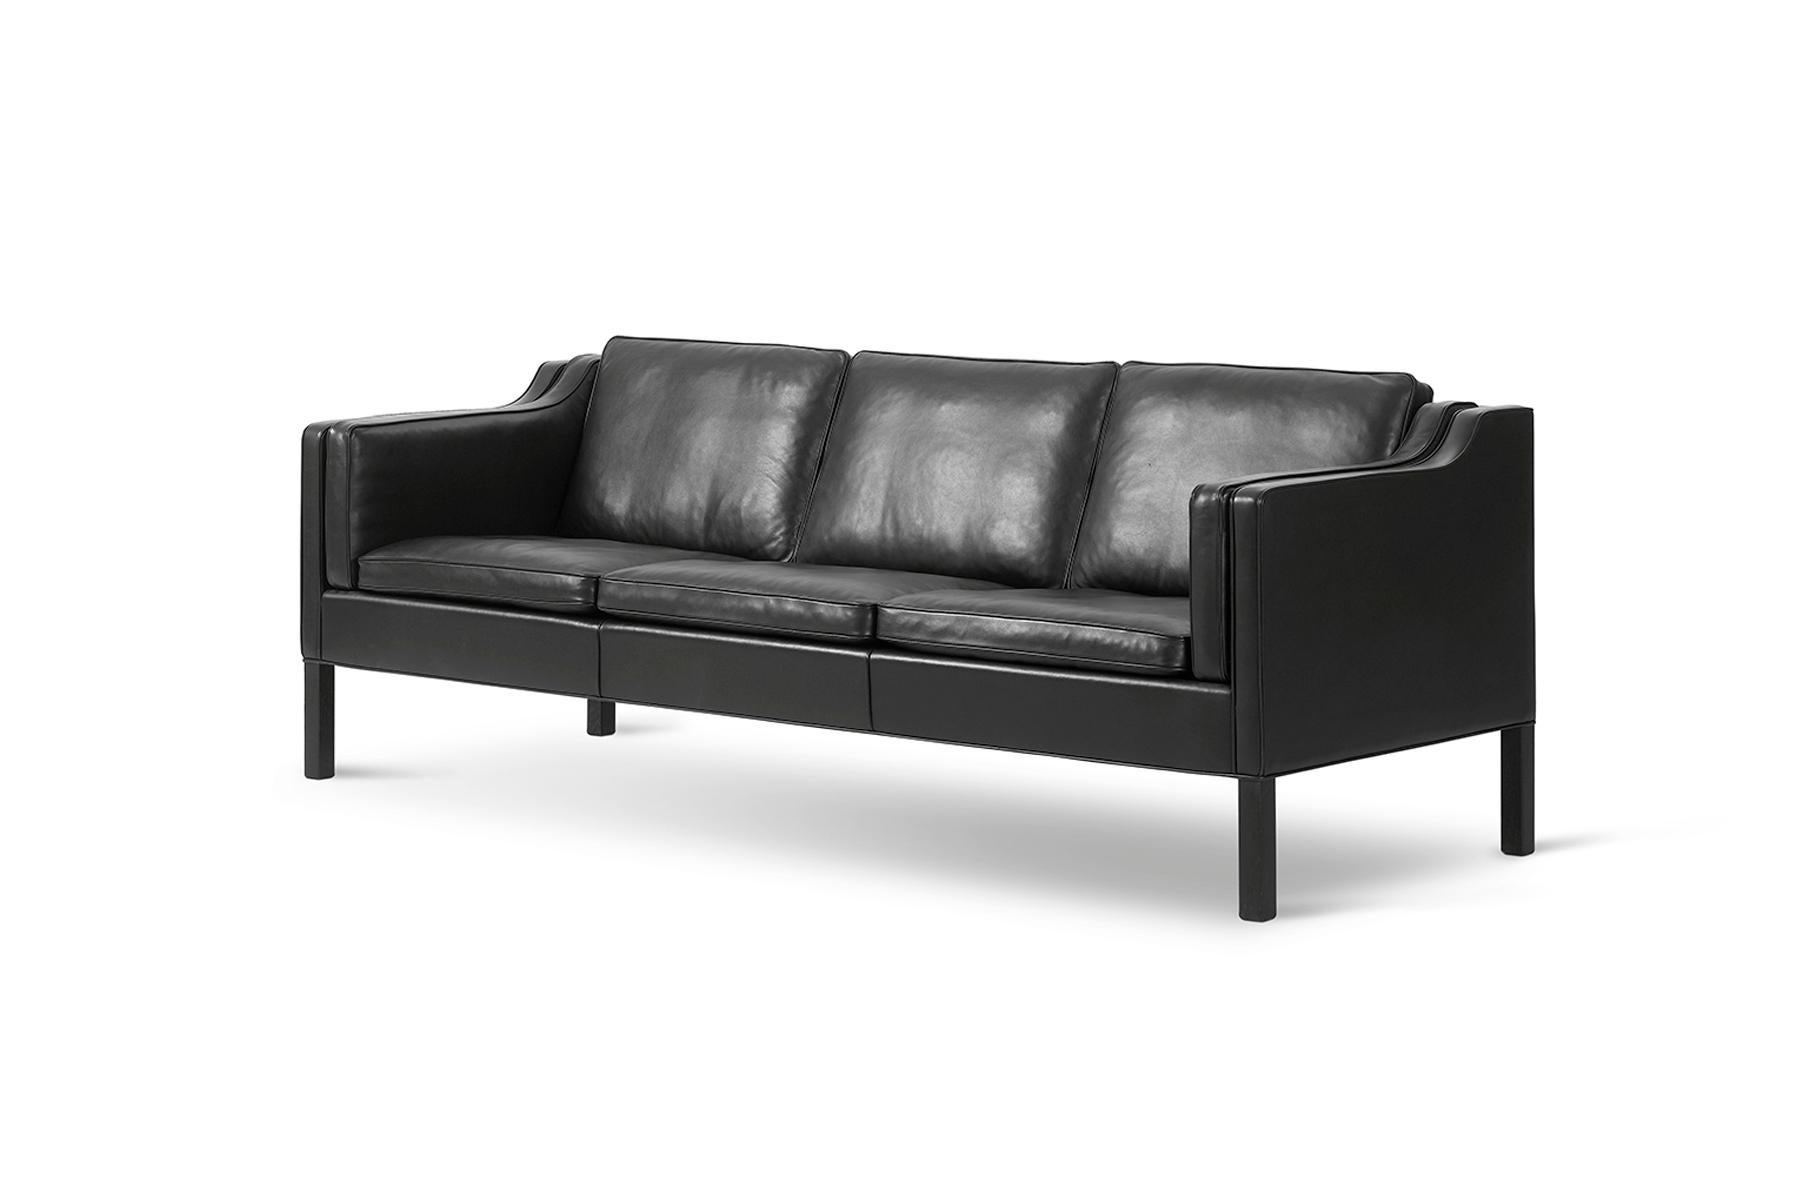 The 2213 sofa was designed by Børge Mogensen for his own home in 1962. With generous proportions, modest aesthetic, a choice of materials and execution second to none, the sofa achieves Mogensen’s ambition to create the ultimate sofa.